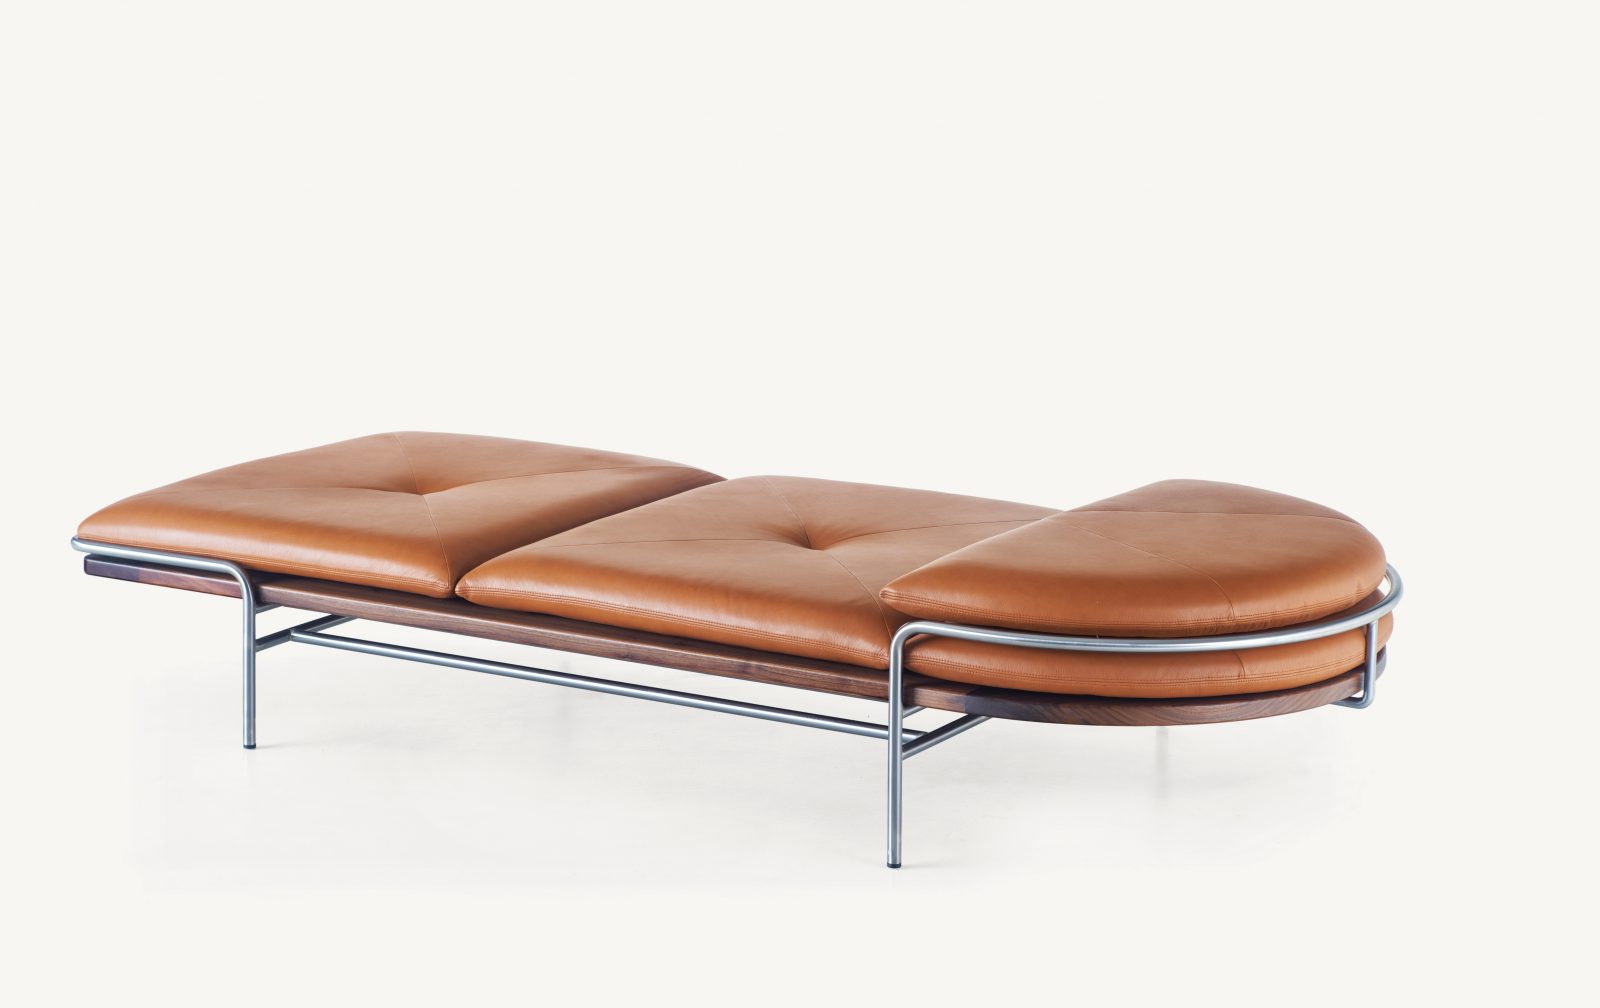 BassamFellows CB-457 Geometric Daybed in Walnut and Satin Nickel, 3:4 back, credit MARCO FAVALI